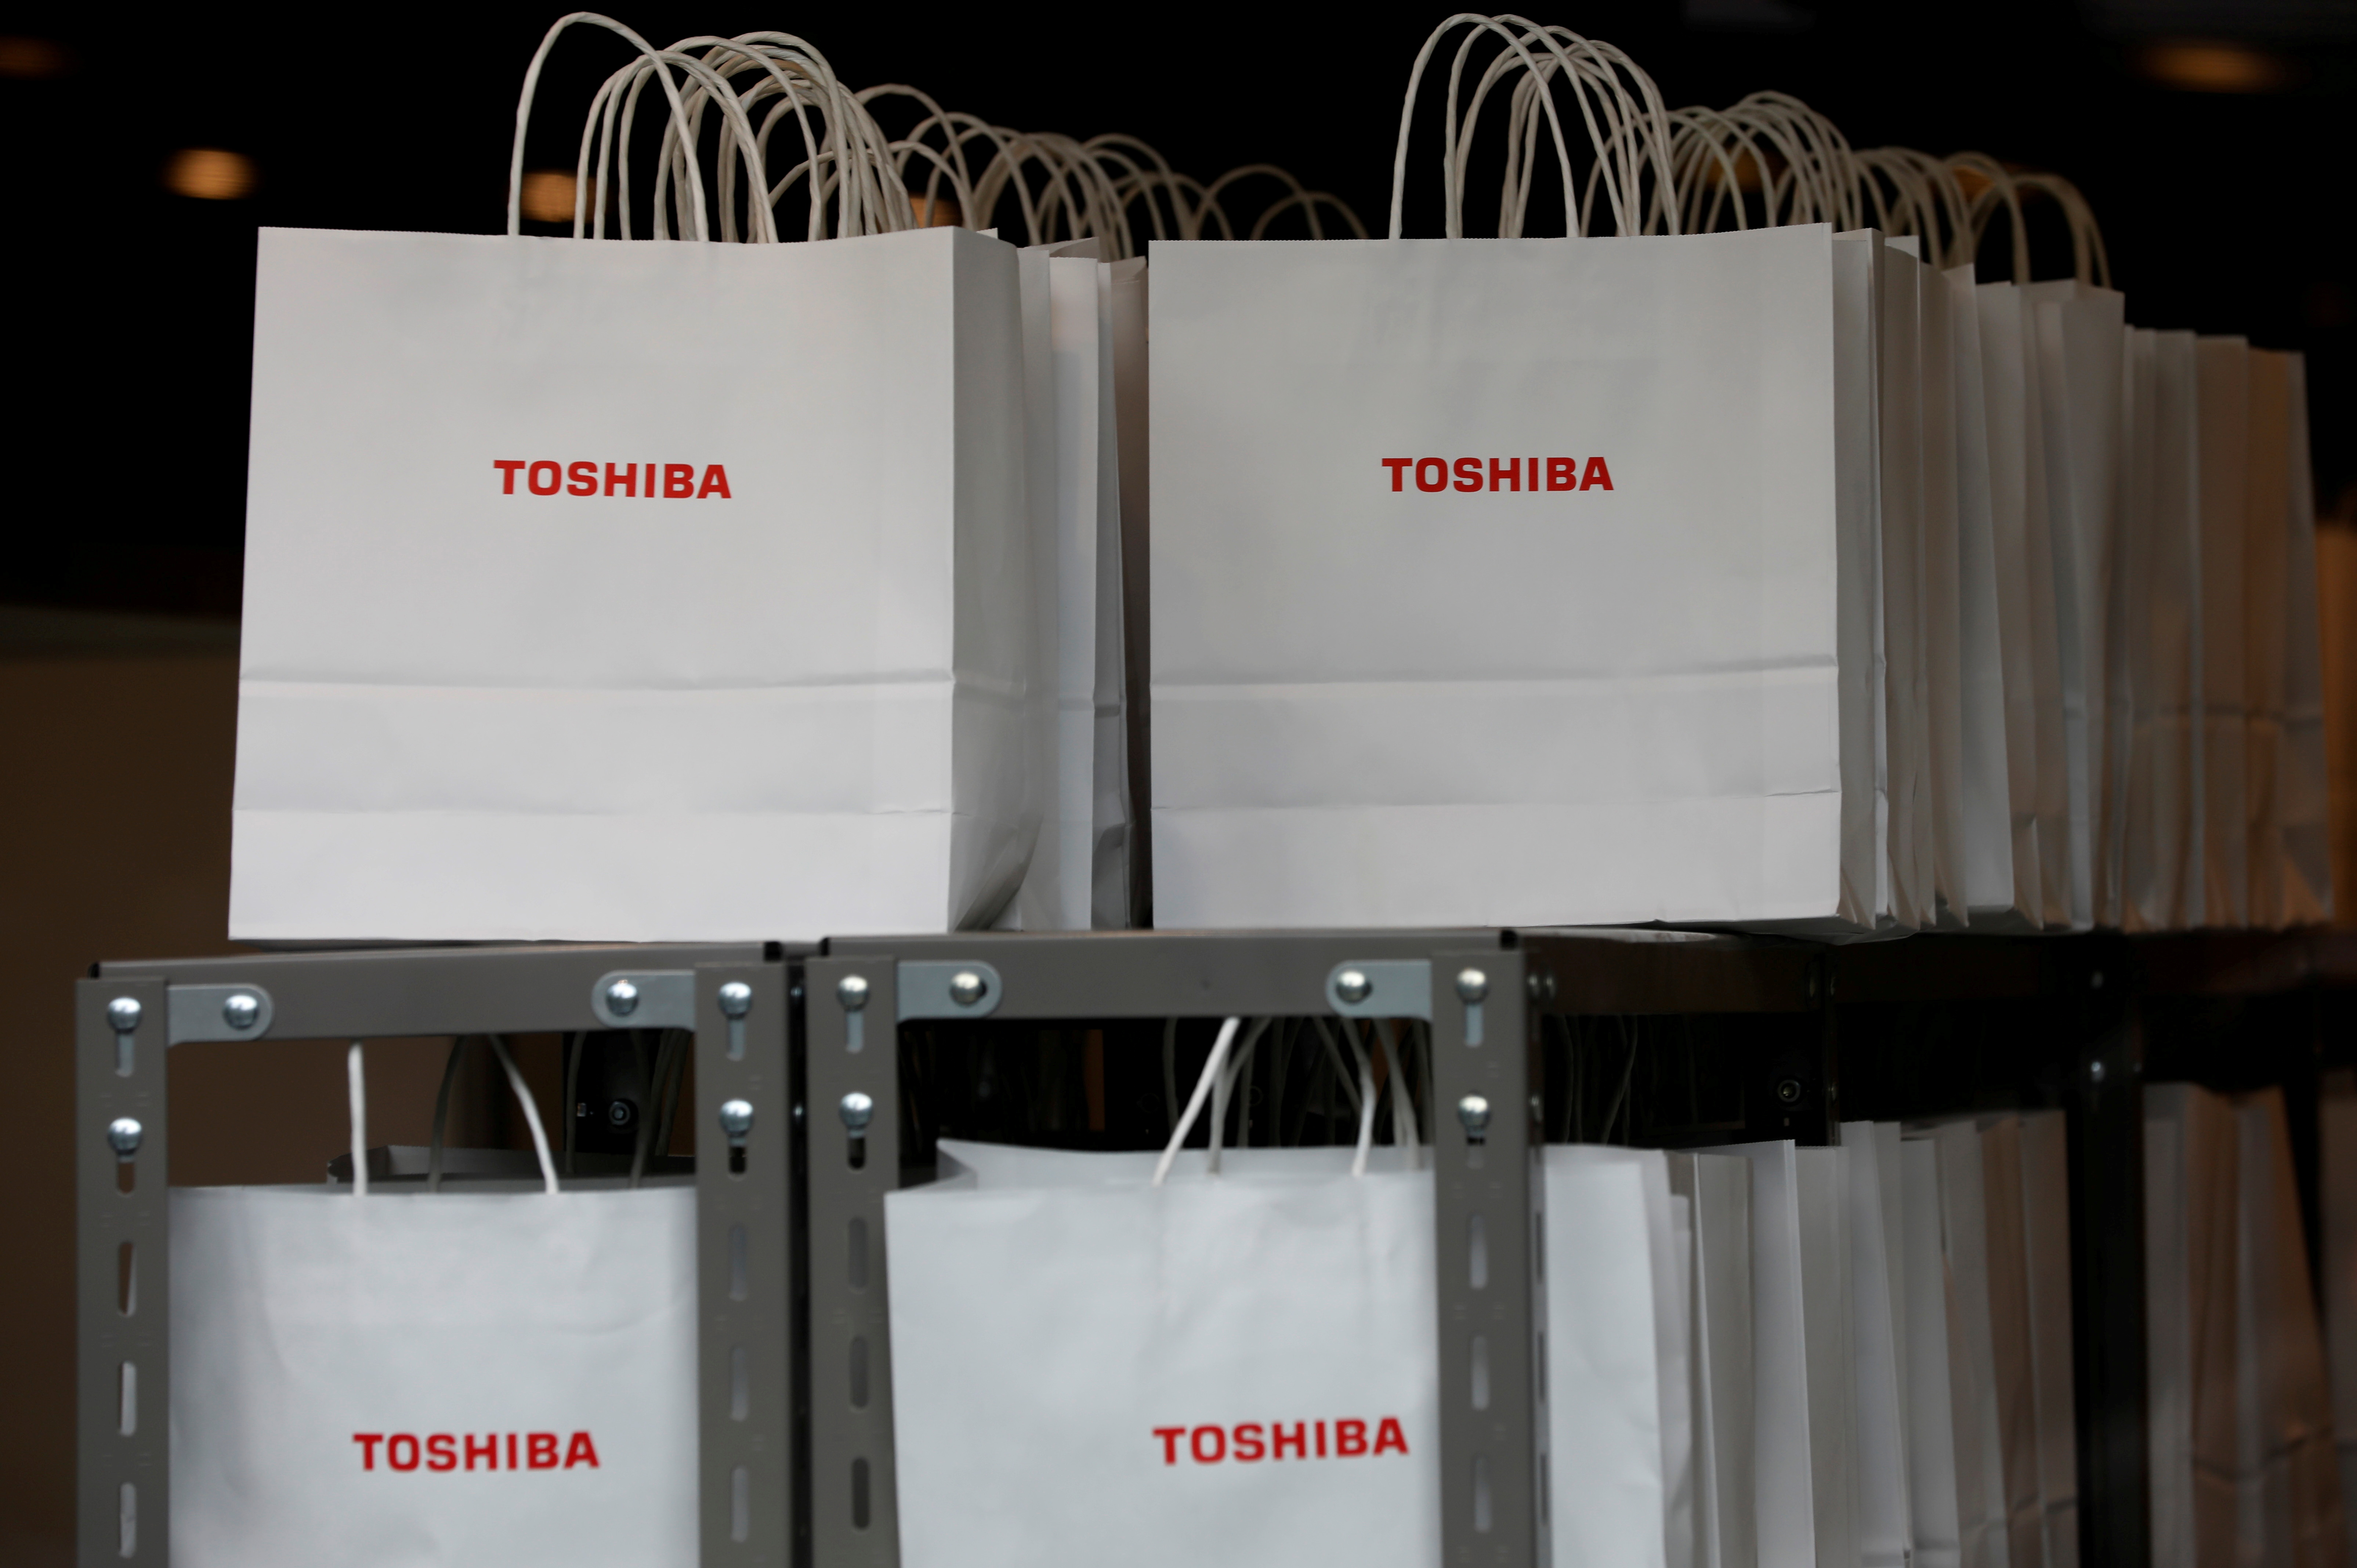 Toshiba Corp's annual general meeting with its shareholders in Tokyo